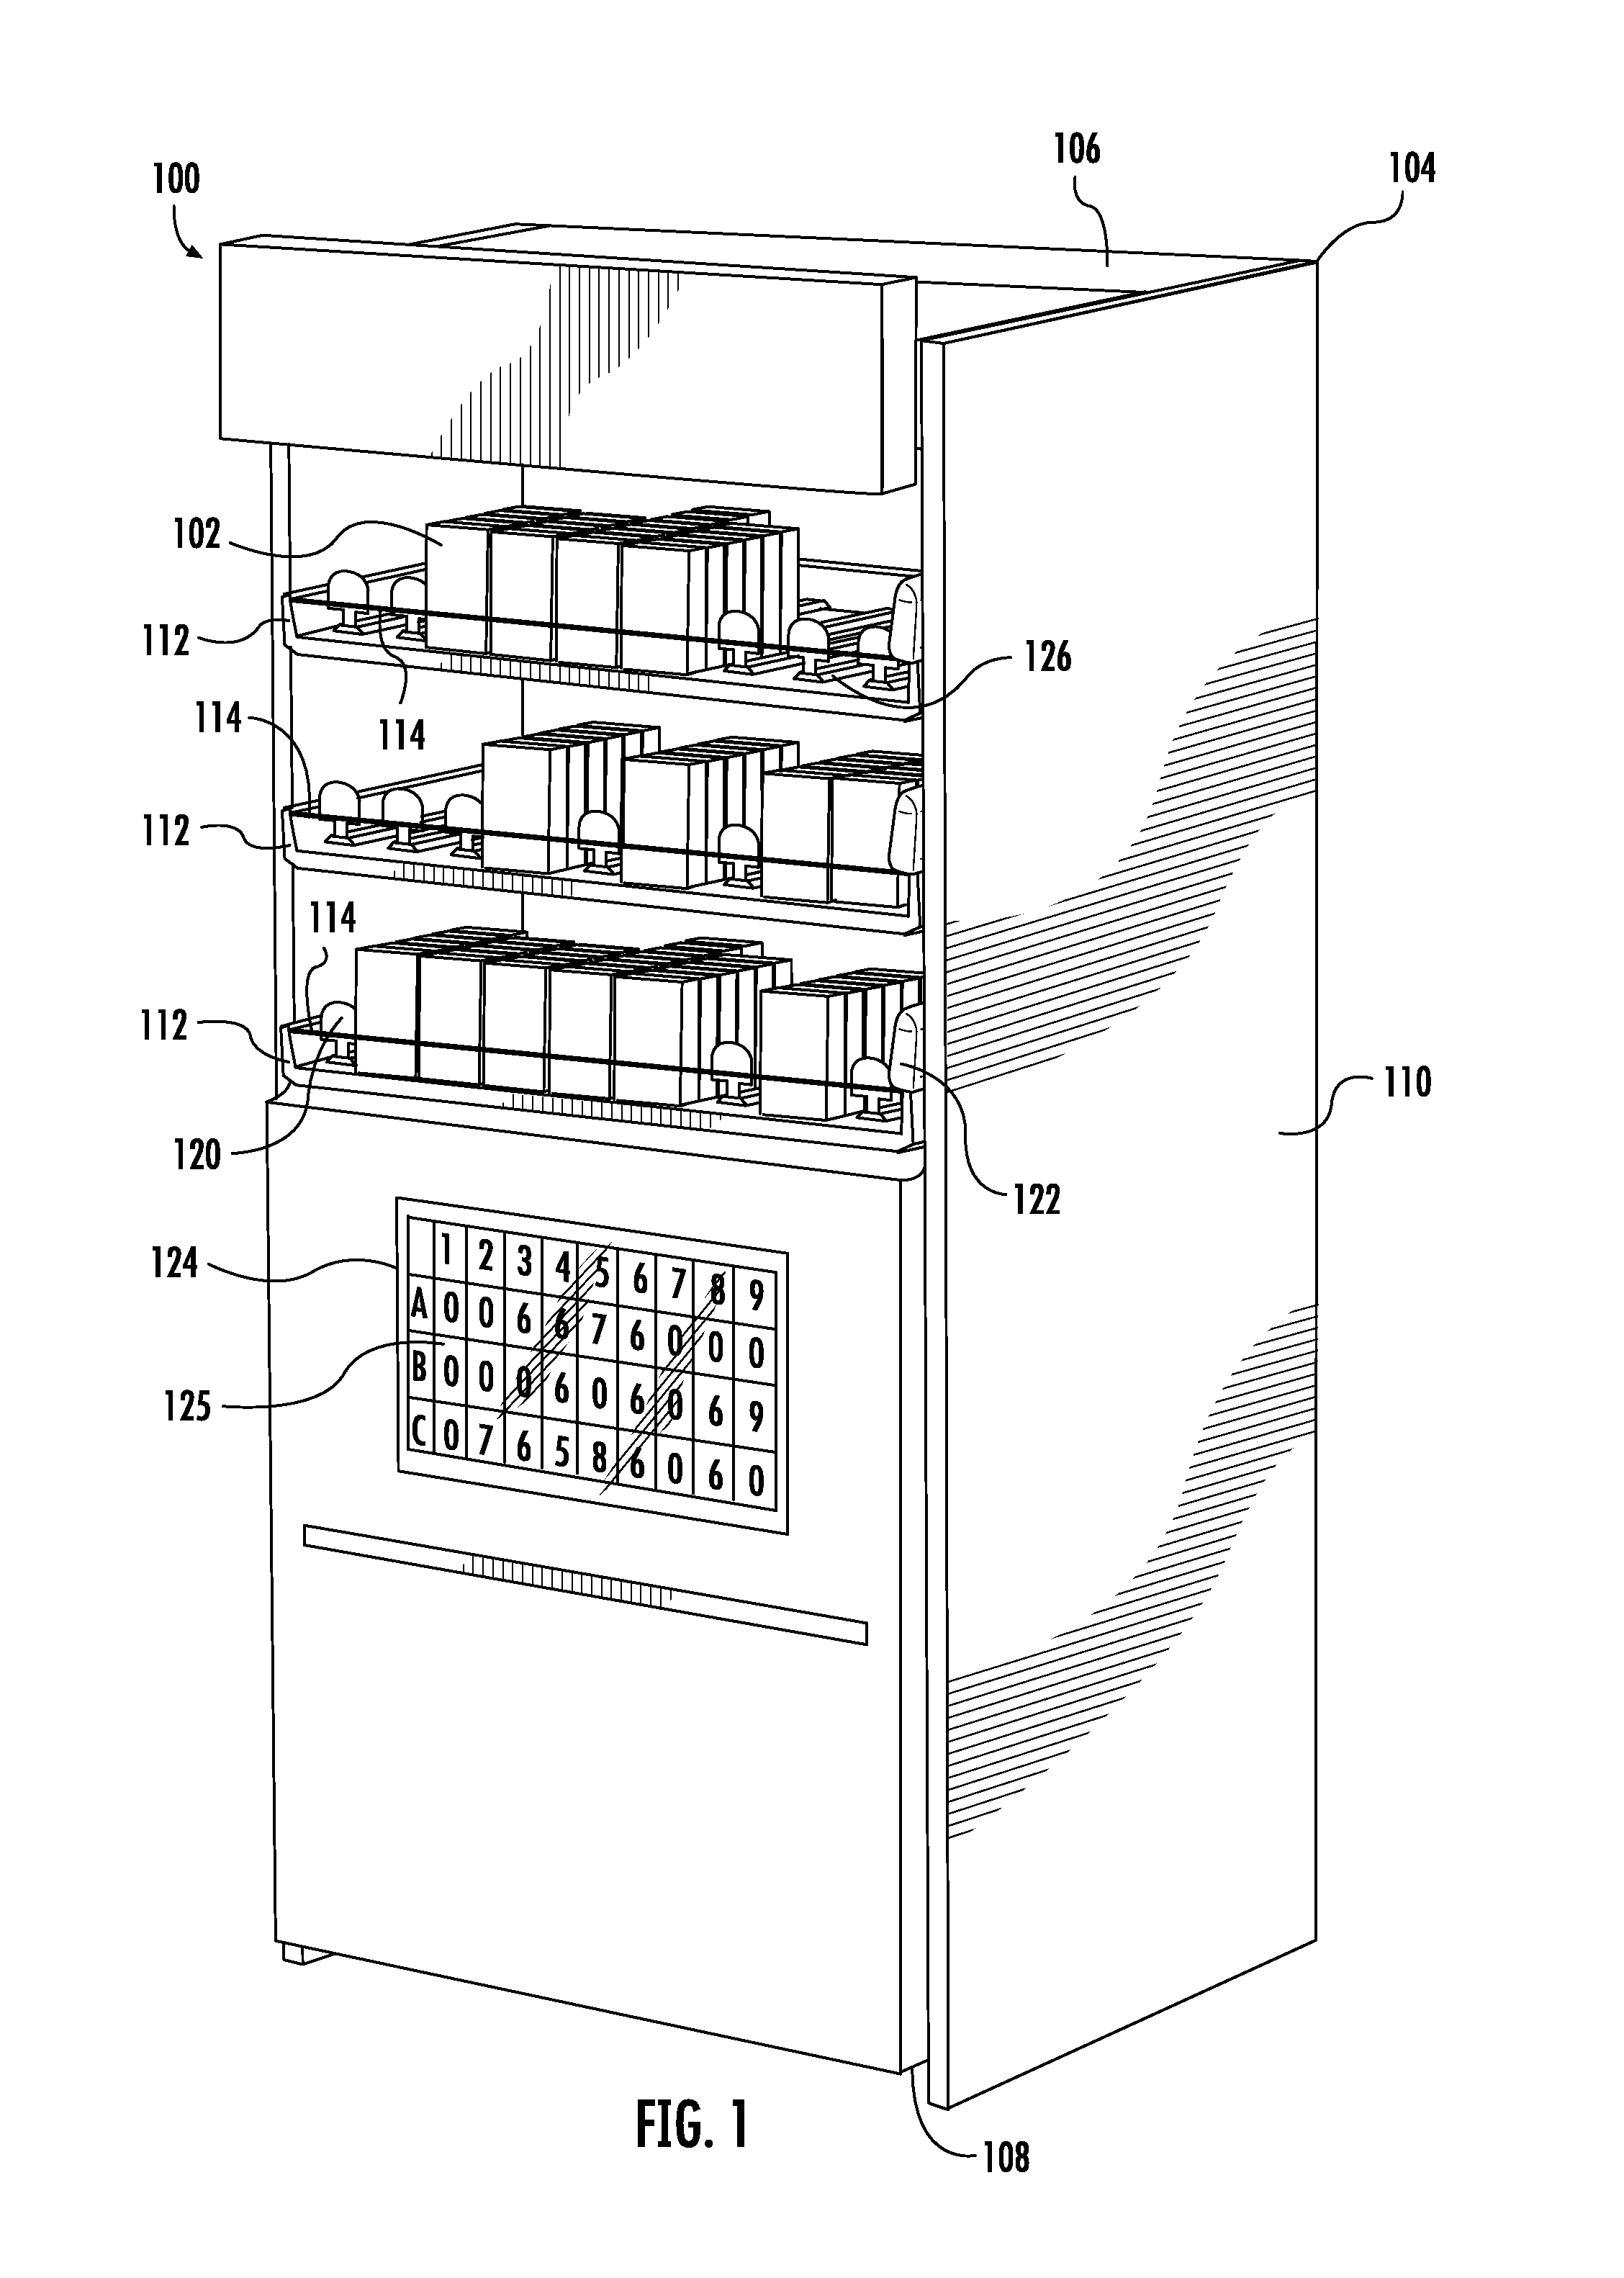 Inventory system for the prevention of tobacco product theft